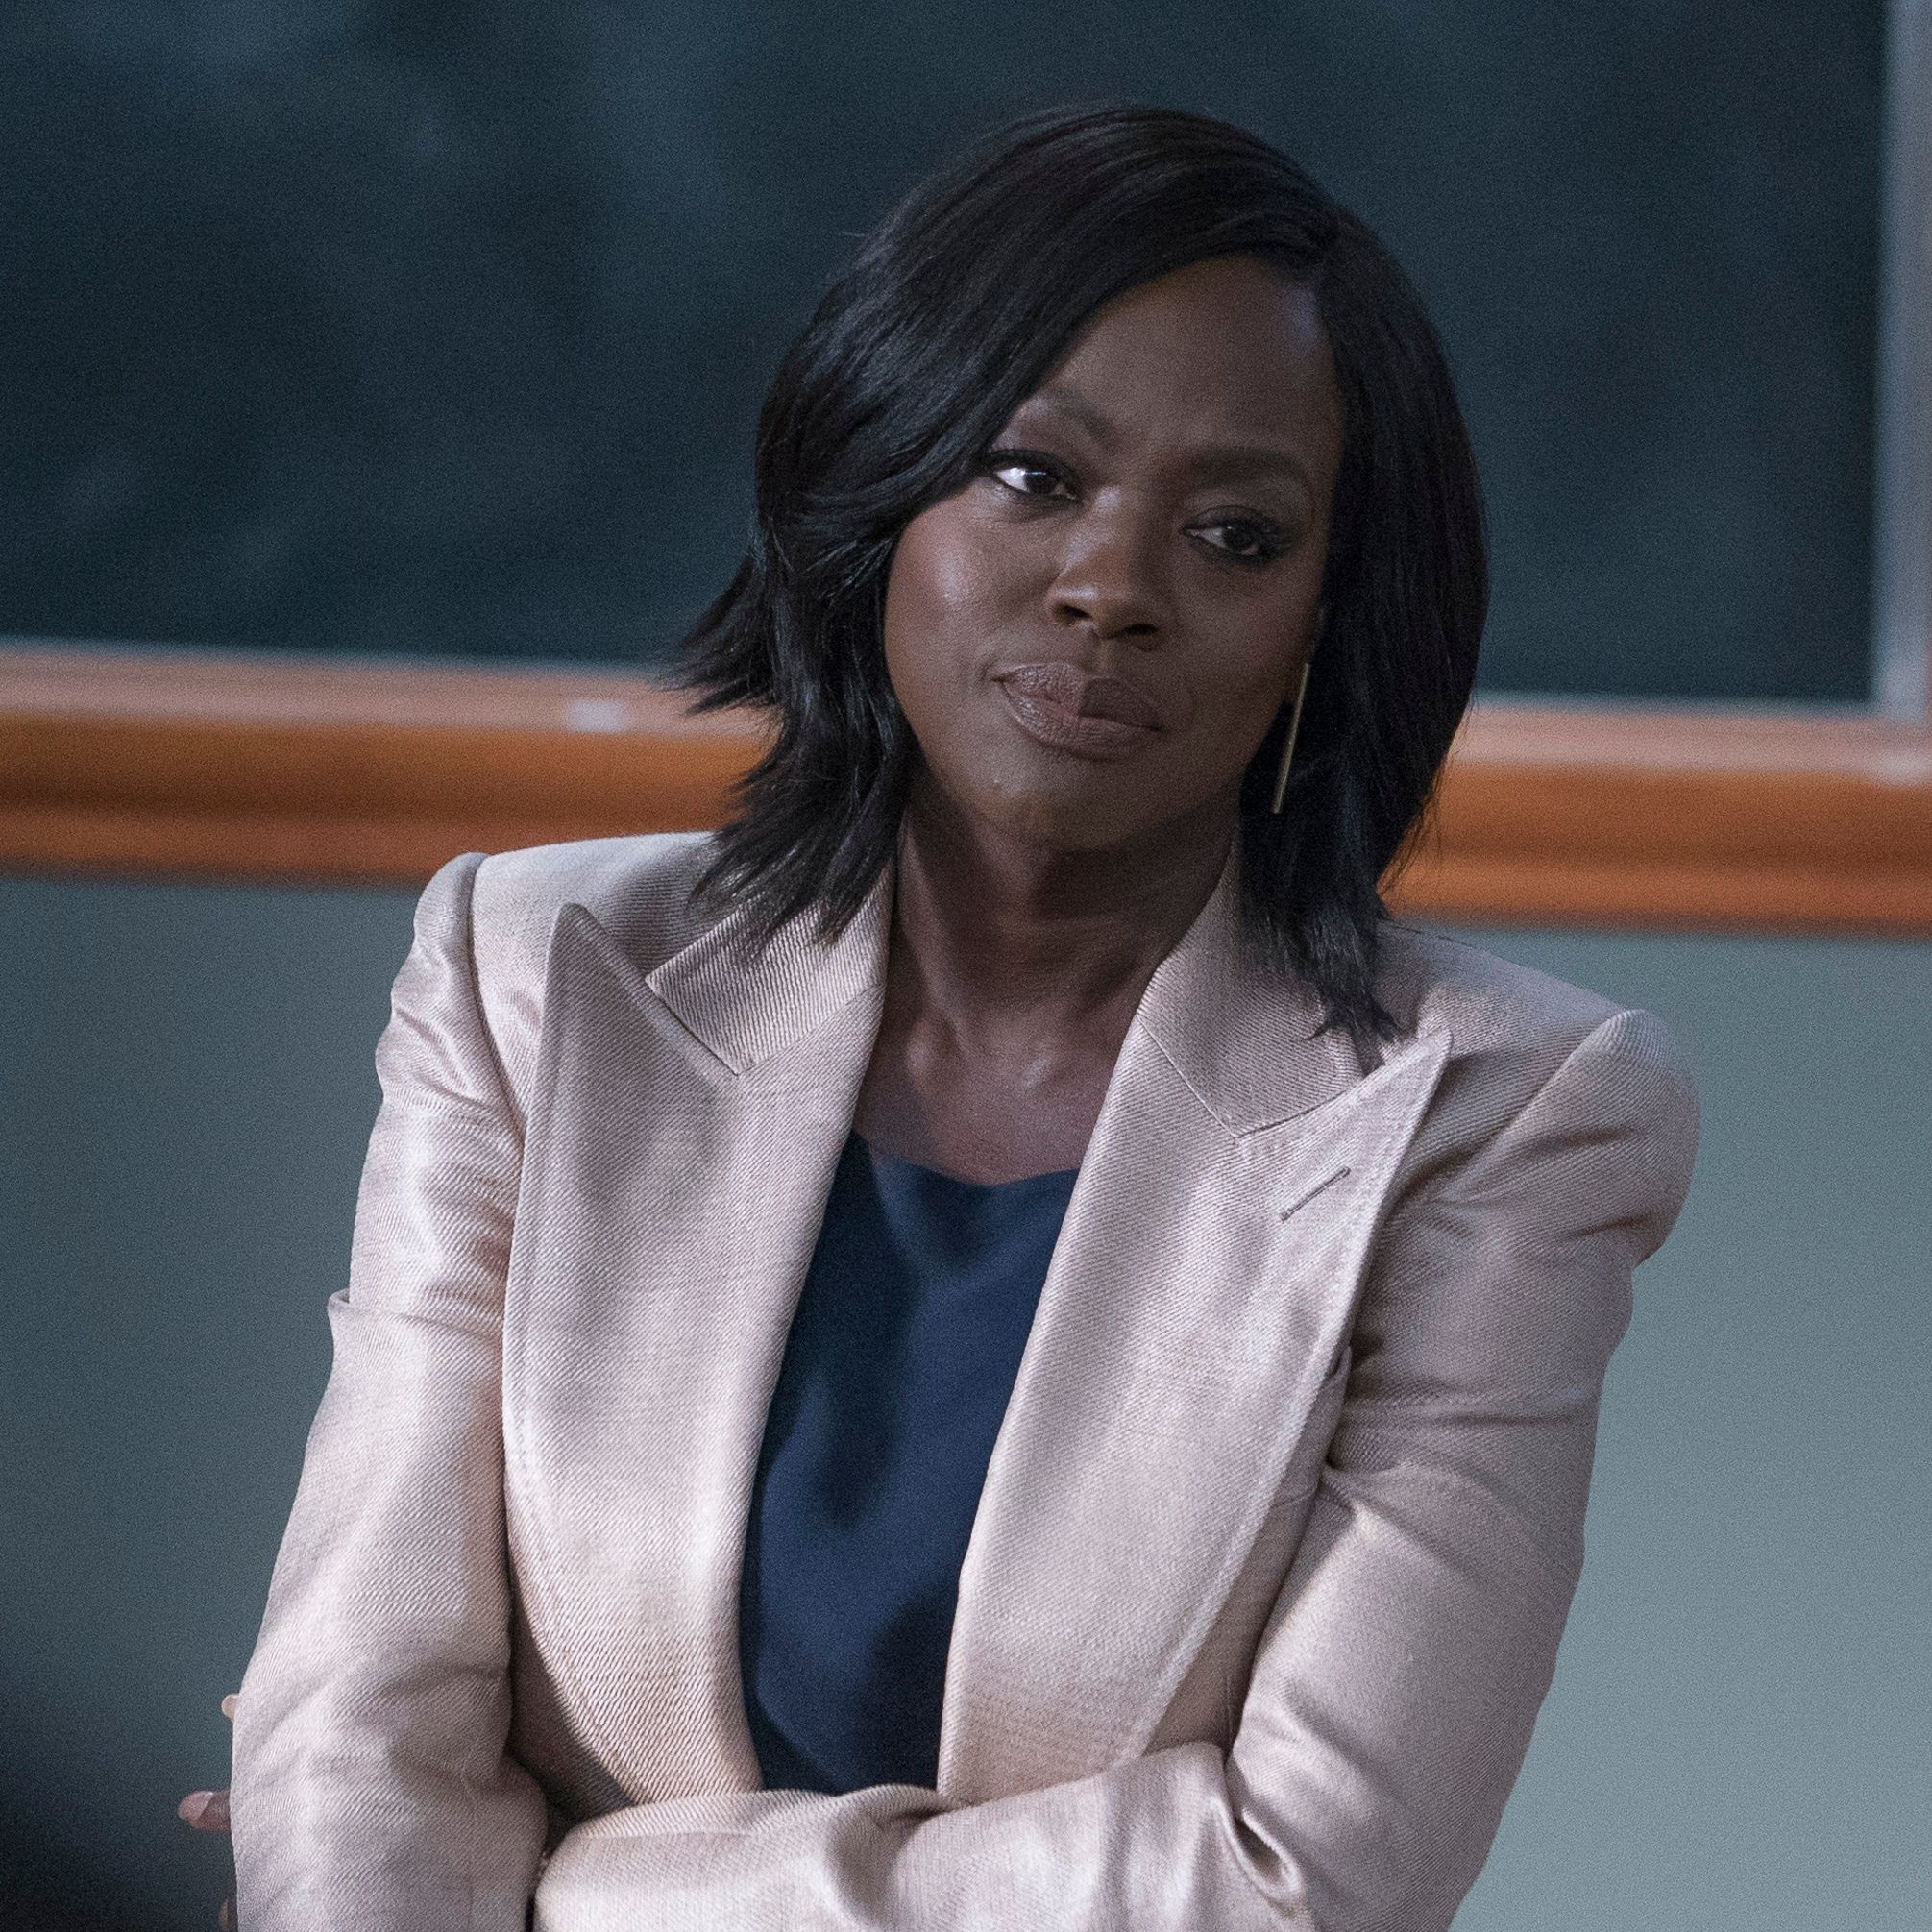 How To Get Away With Murder Ending After Season 6 - 